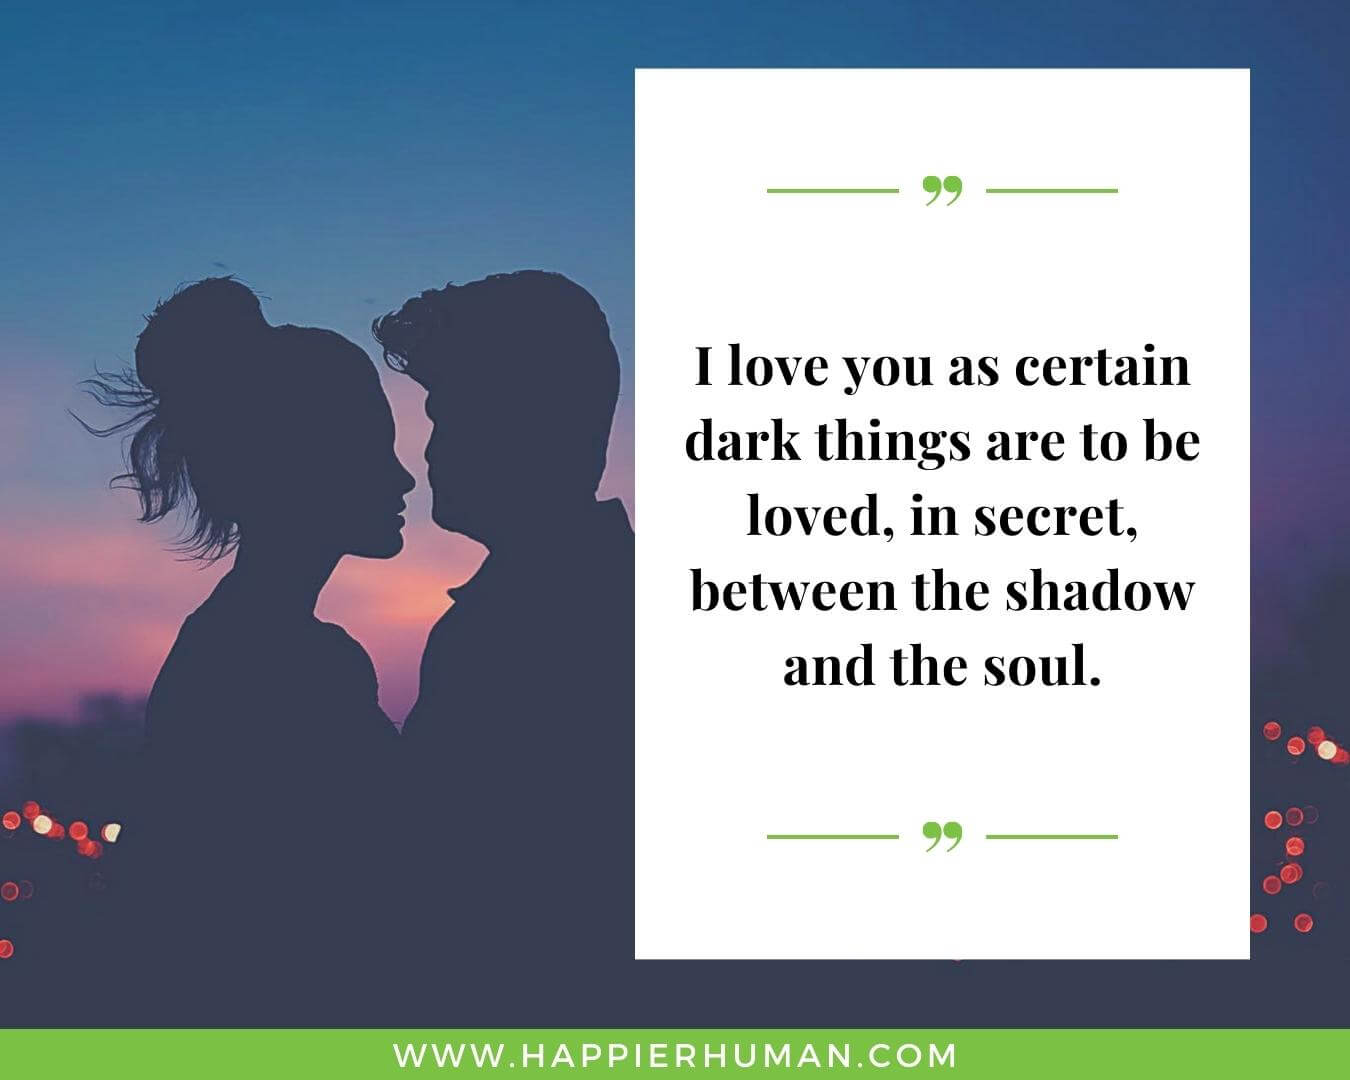 Romantic Quotes For Wife- “I love you as certain dark things are to be loved, in secret, between the shadow and the soul.”